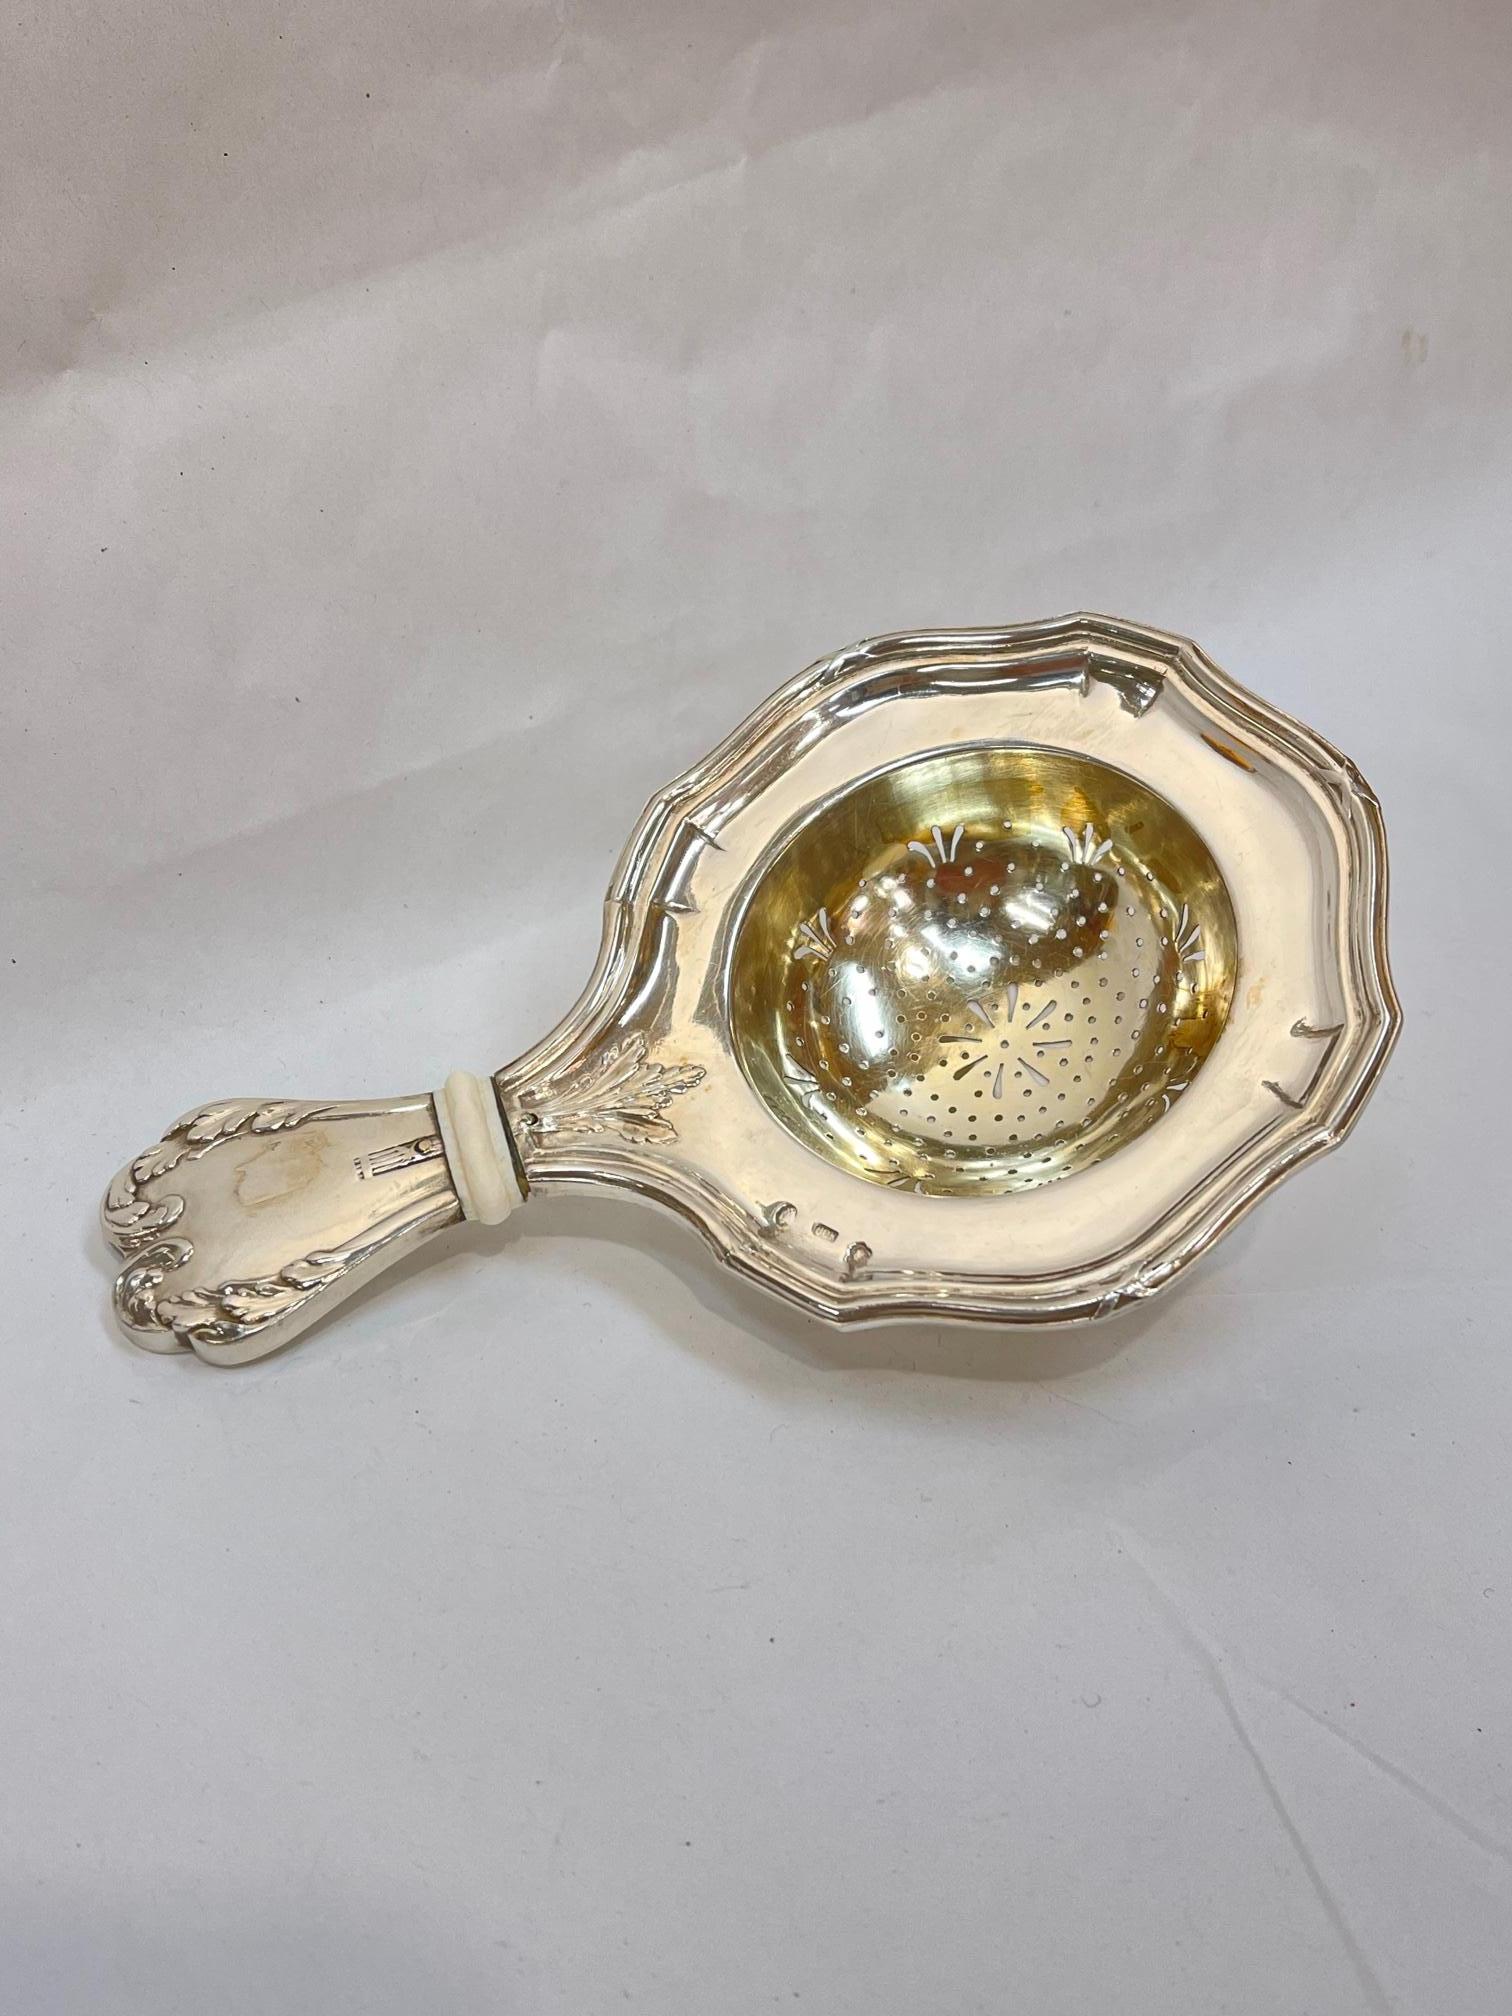 Hand-Crafted Antique Sterling Silver Tea Strainer For Sale